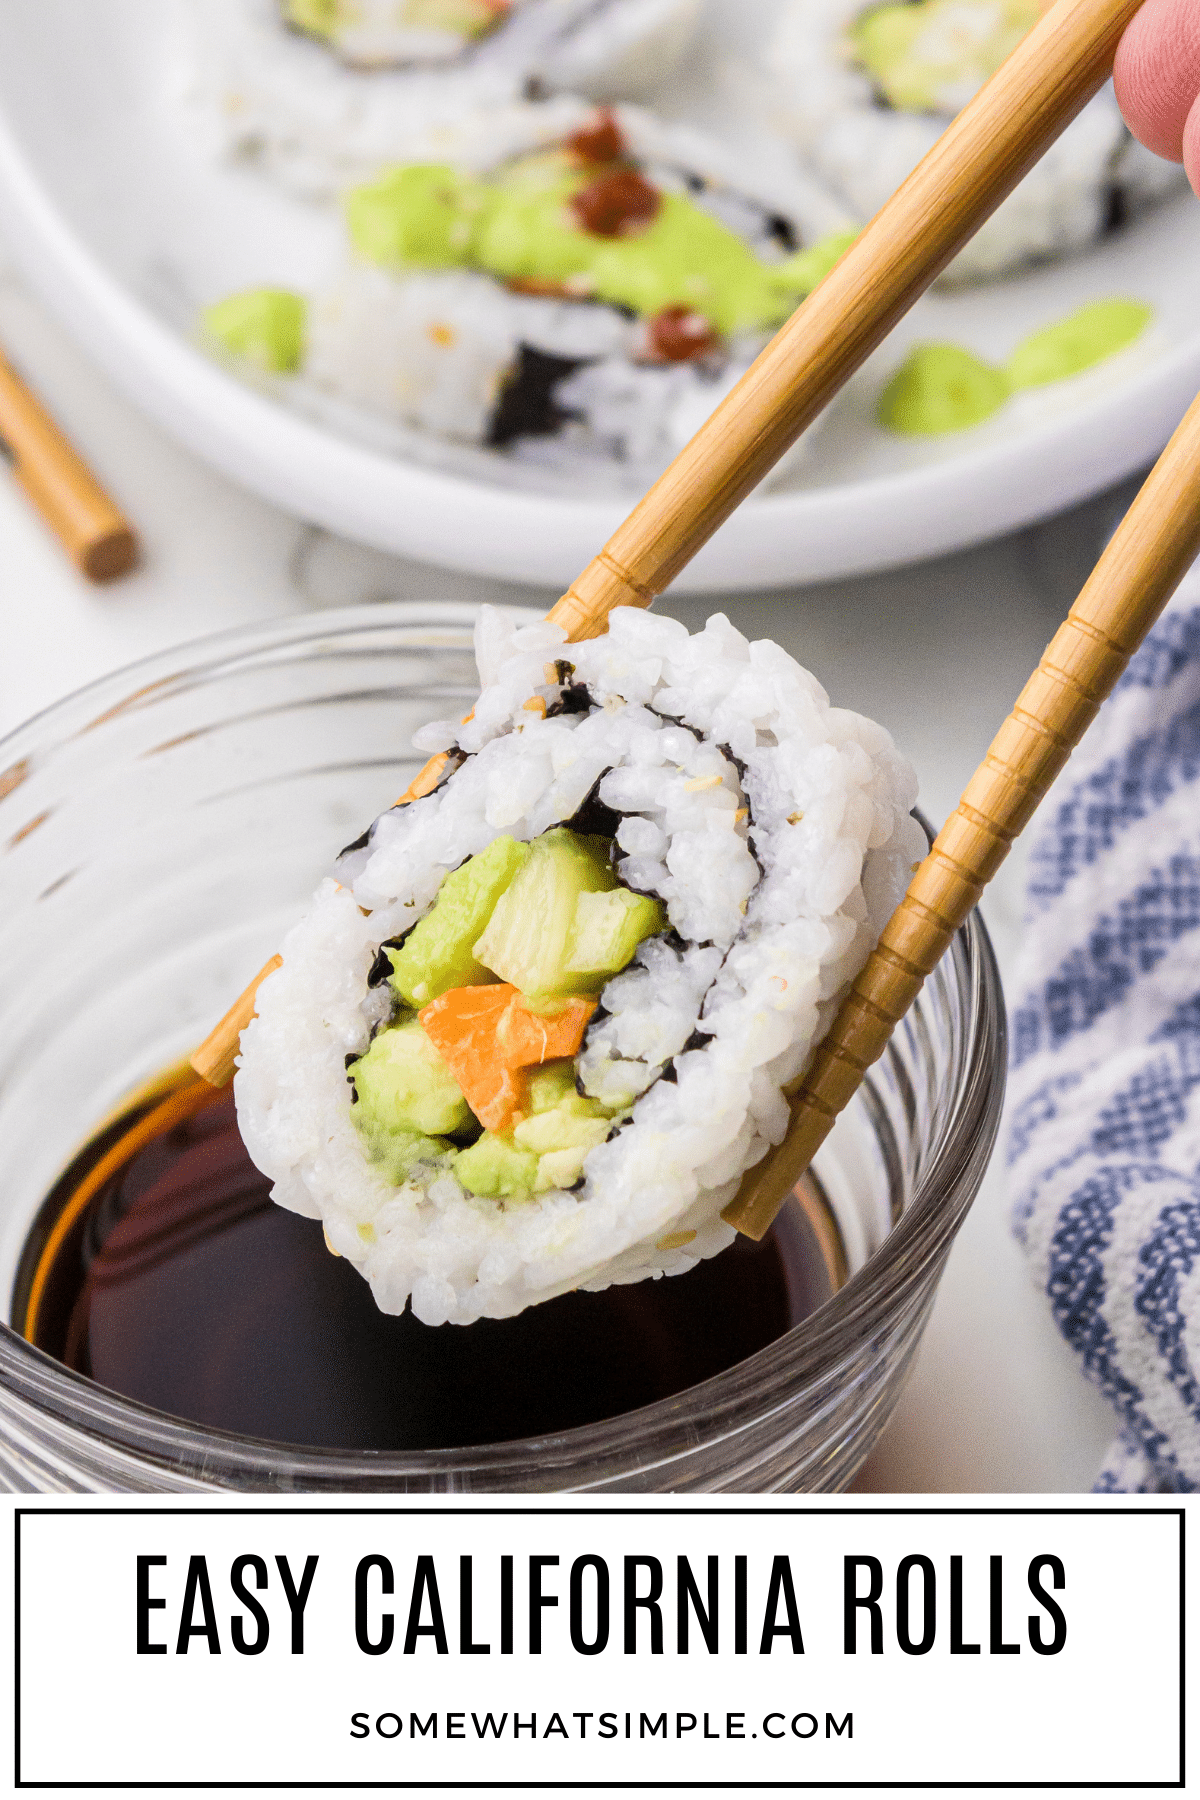 This sushi favorite is full of flavor and easy to make. If you're a sushi pro or a newbie, our California Roll recipe is sure to impress! via @somewhatsimple